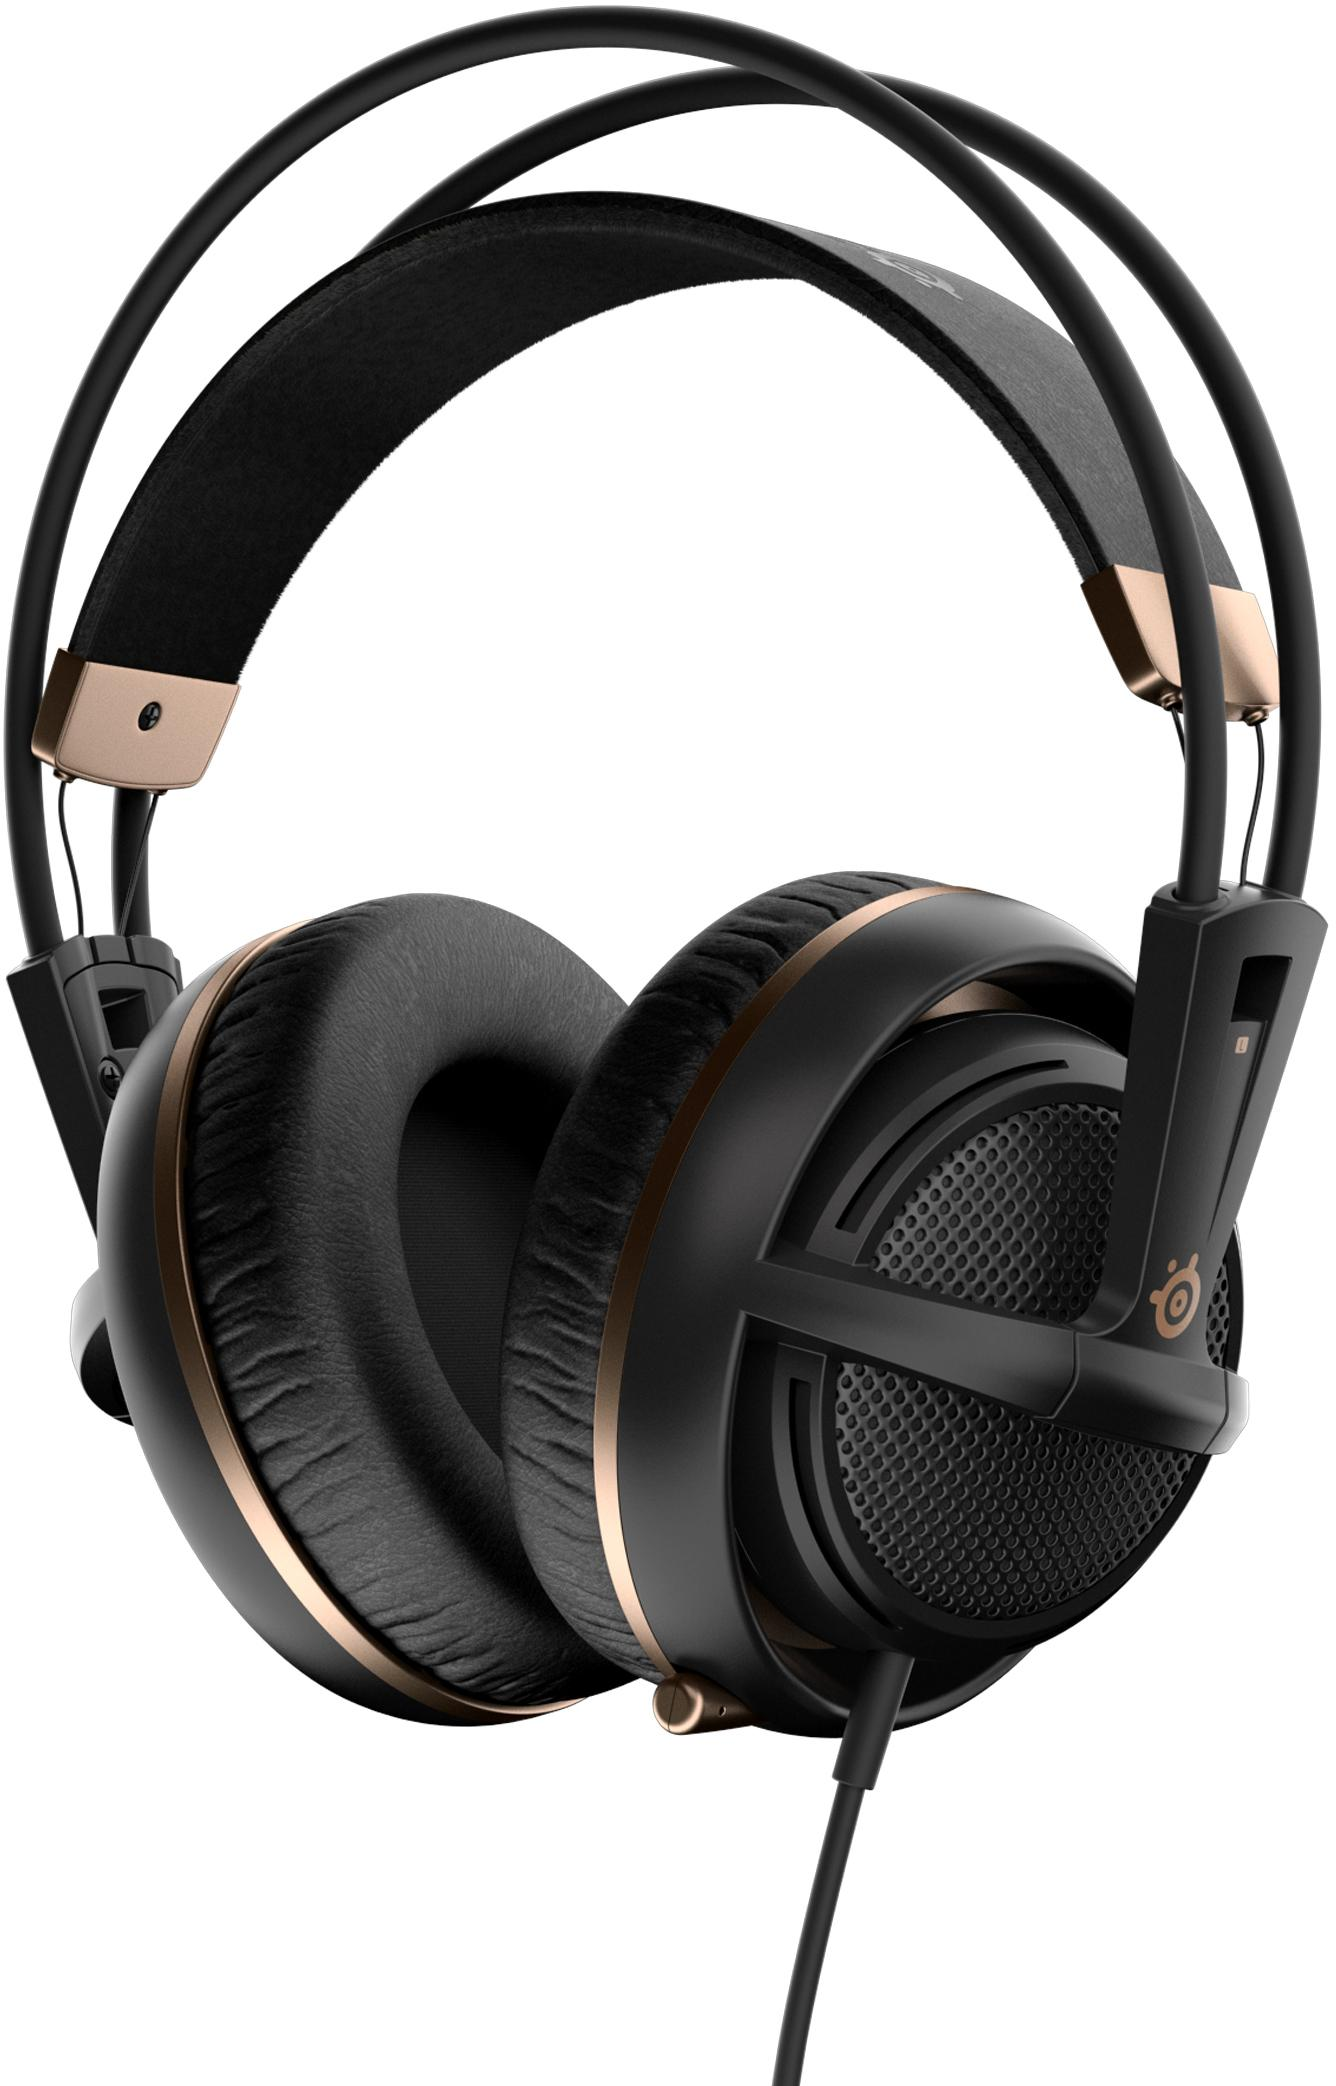 SteelSeries Siberia 200 Gaming Headset (alchemy gold) (PC), SteelSeries